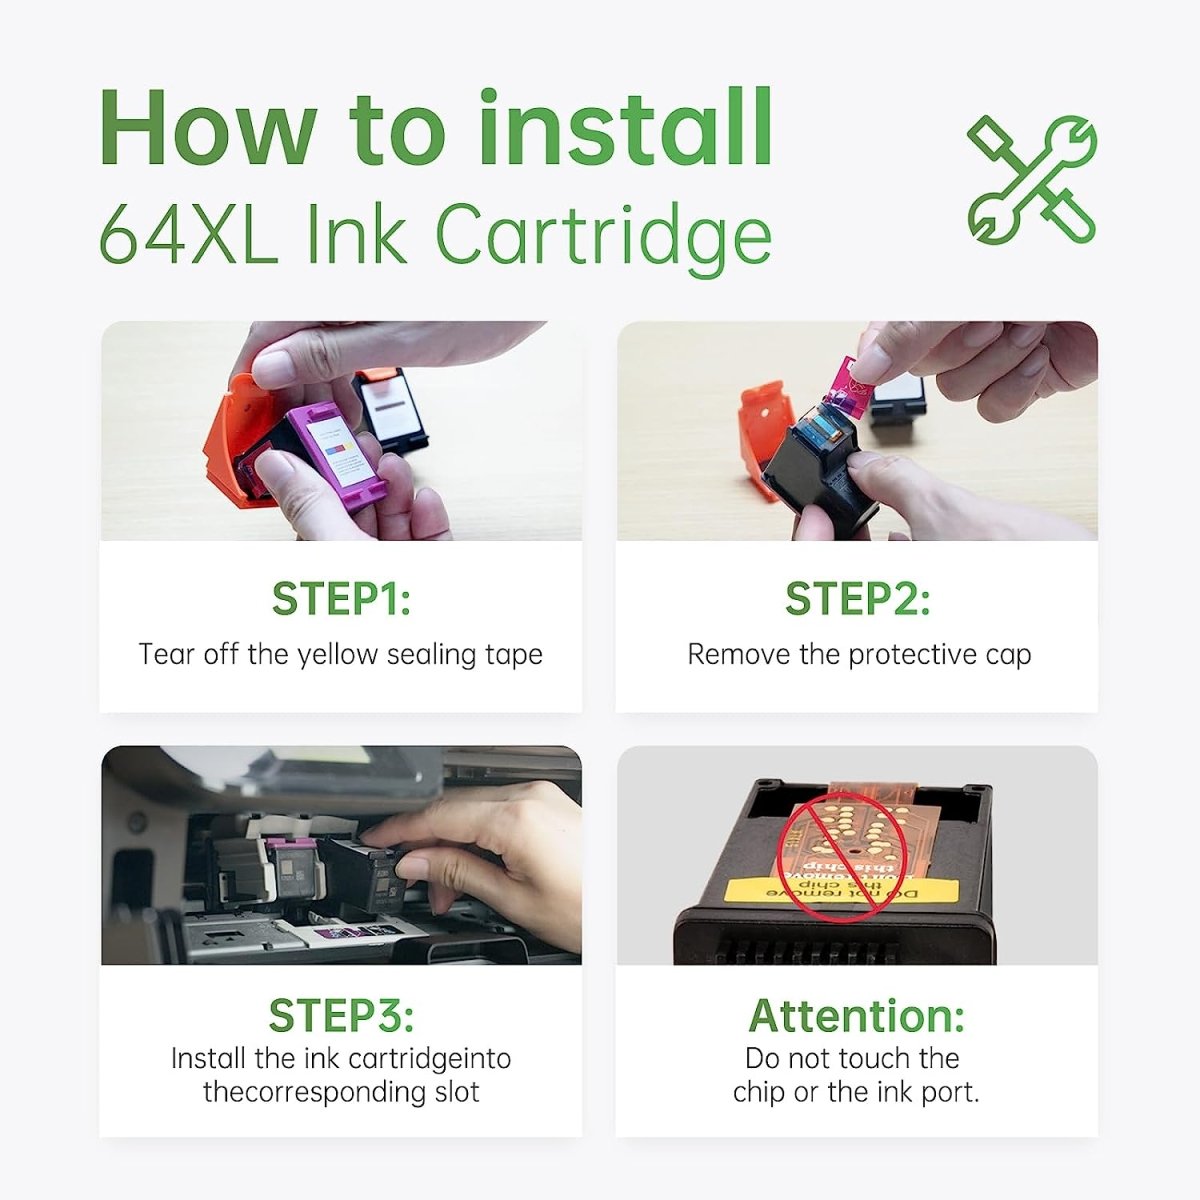 How to Install HP 64xl Ink Cartridge in HP Envy?